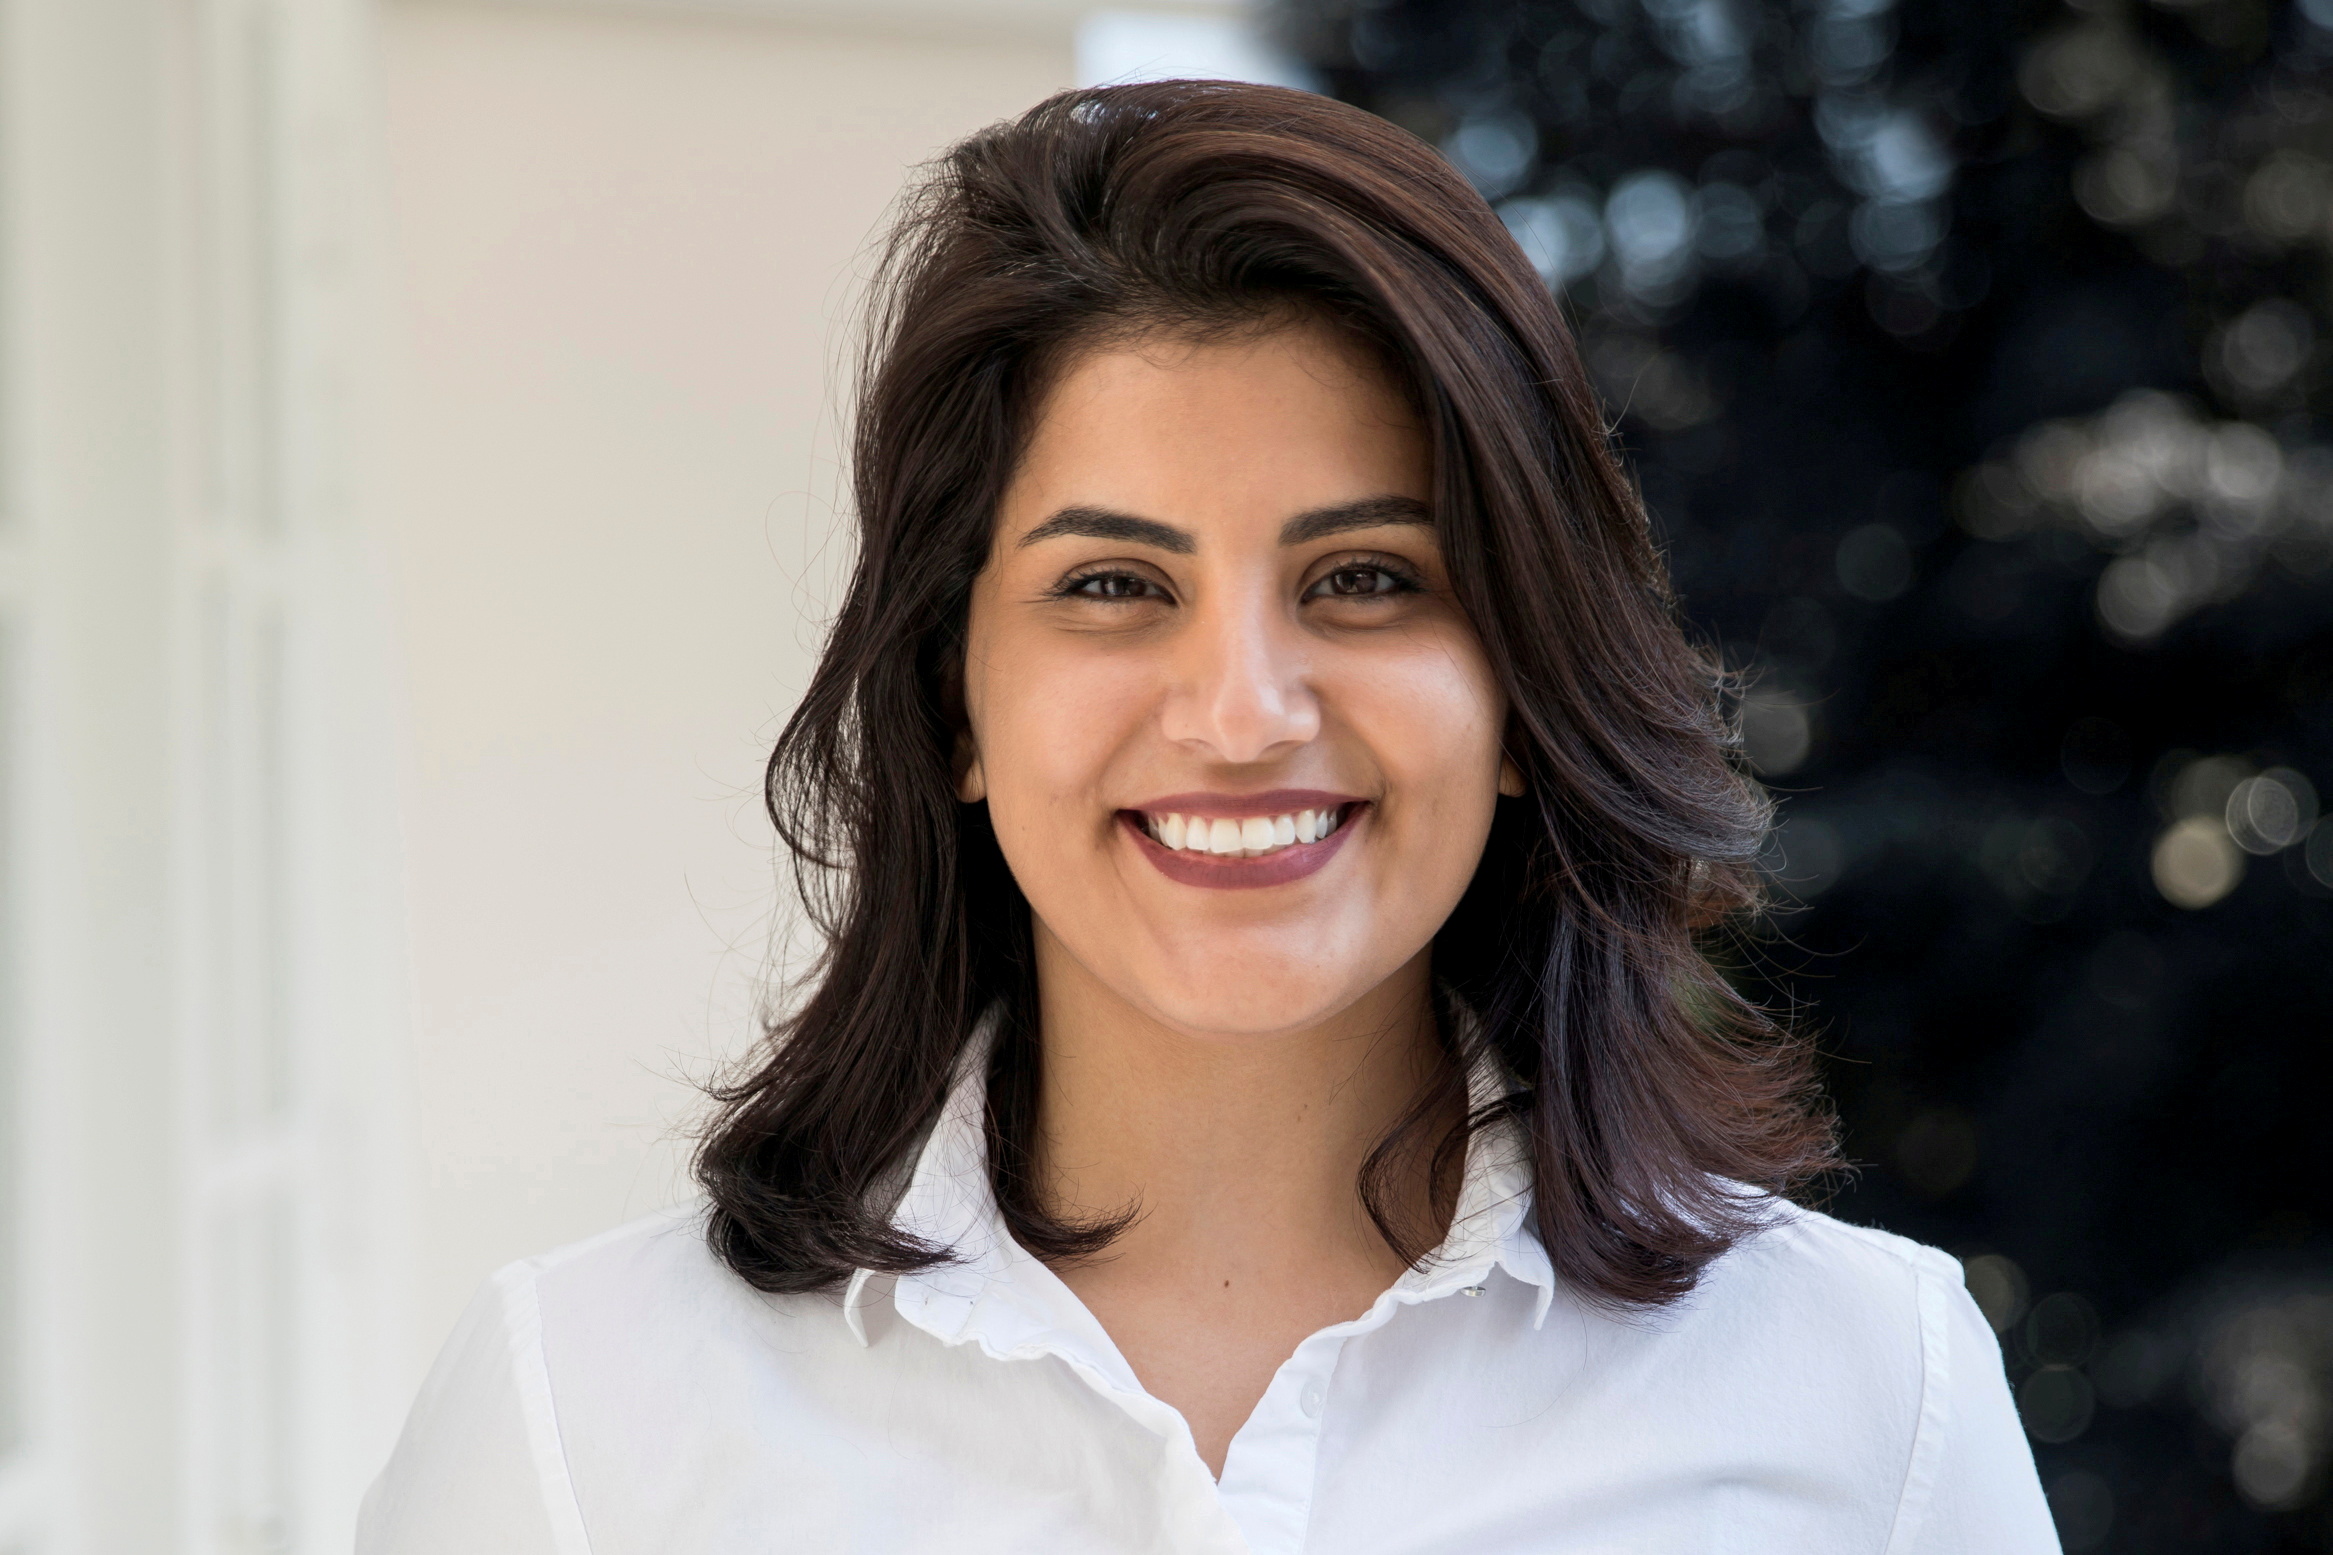 Saudi women's rights activist Loujain al-Hathloul is seen in this undated handout picture